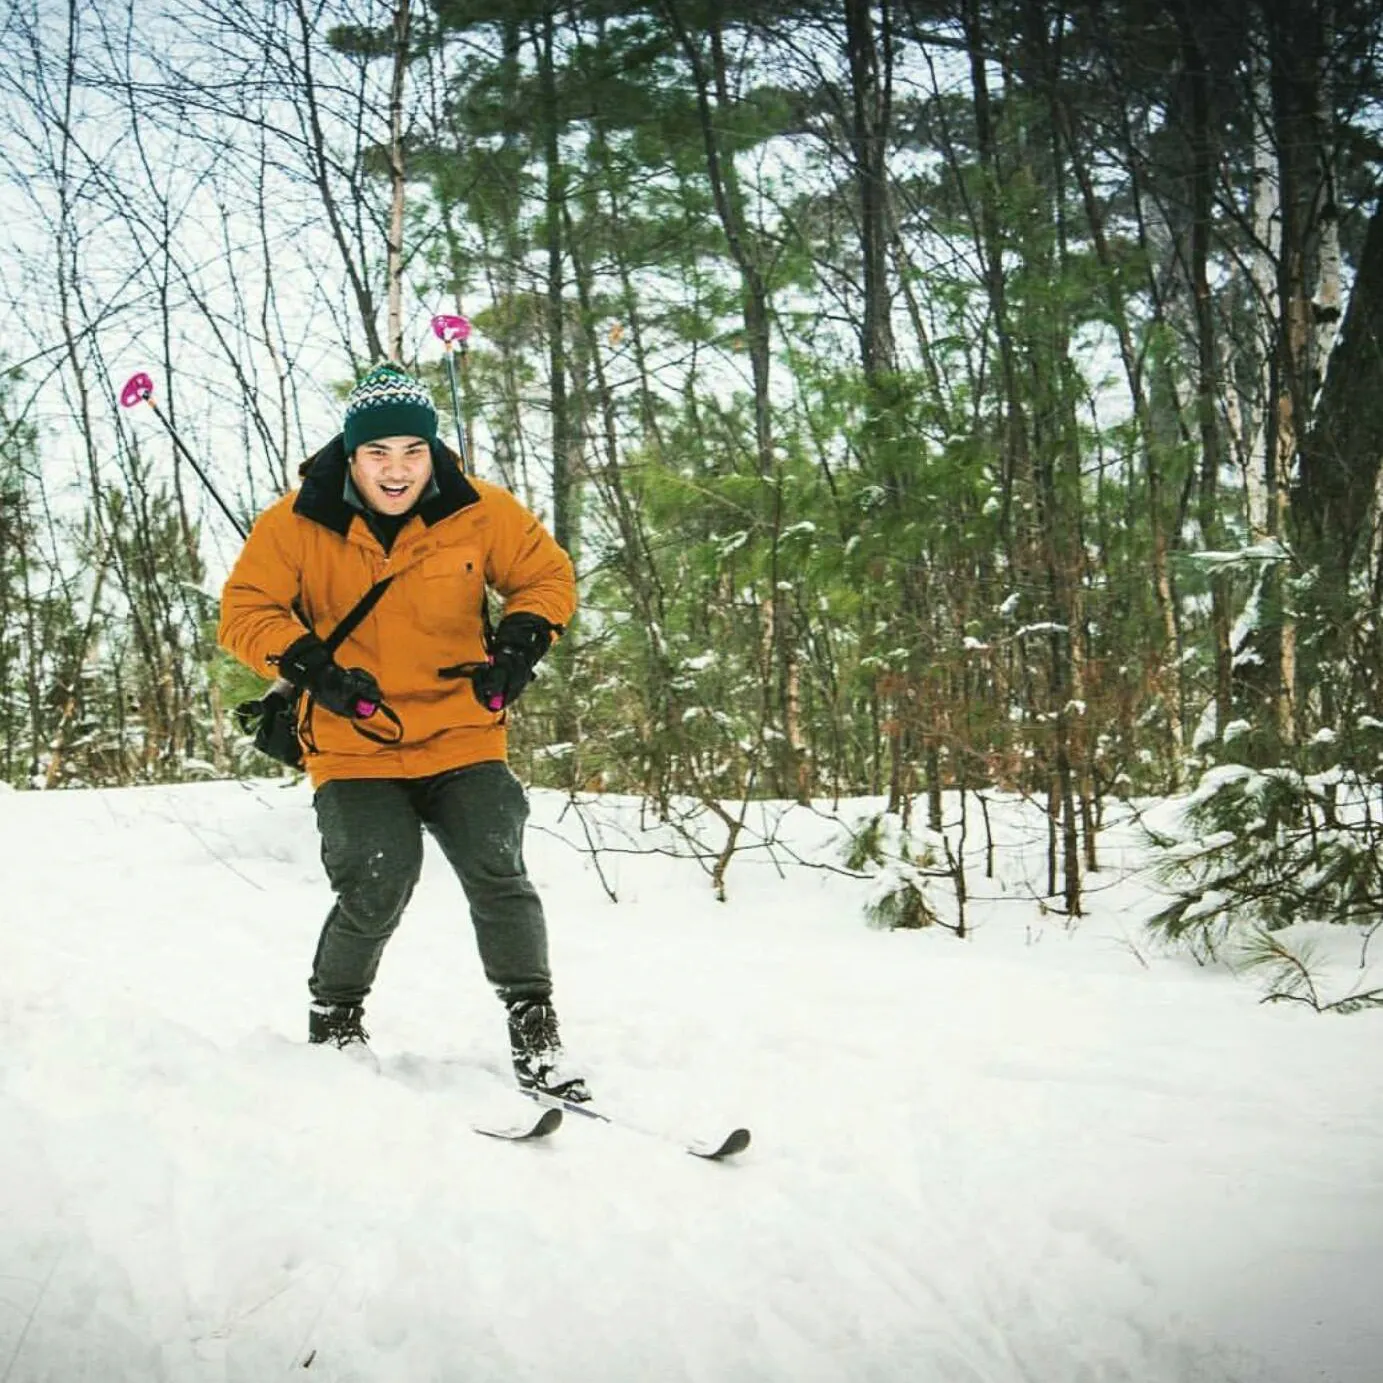 Student cross country skiing